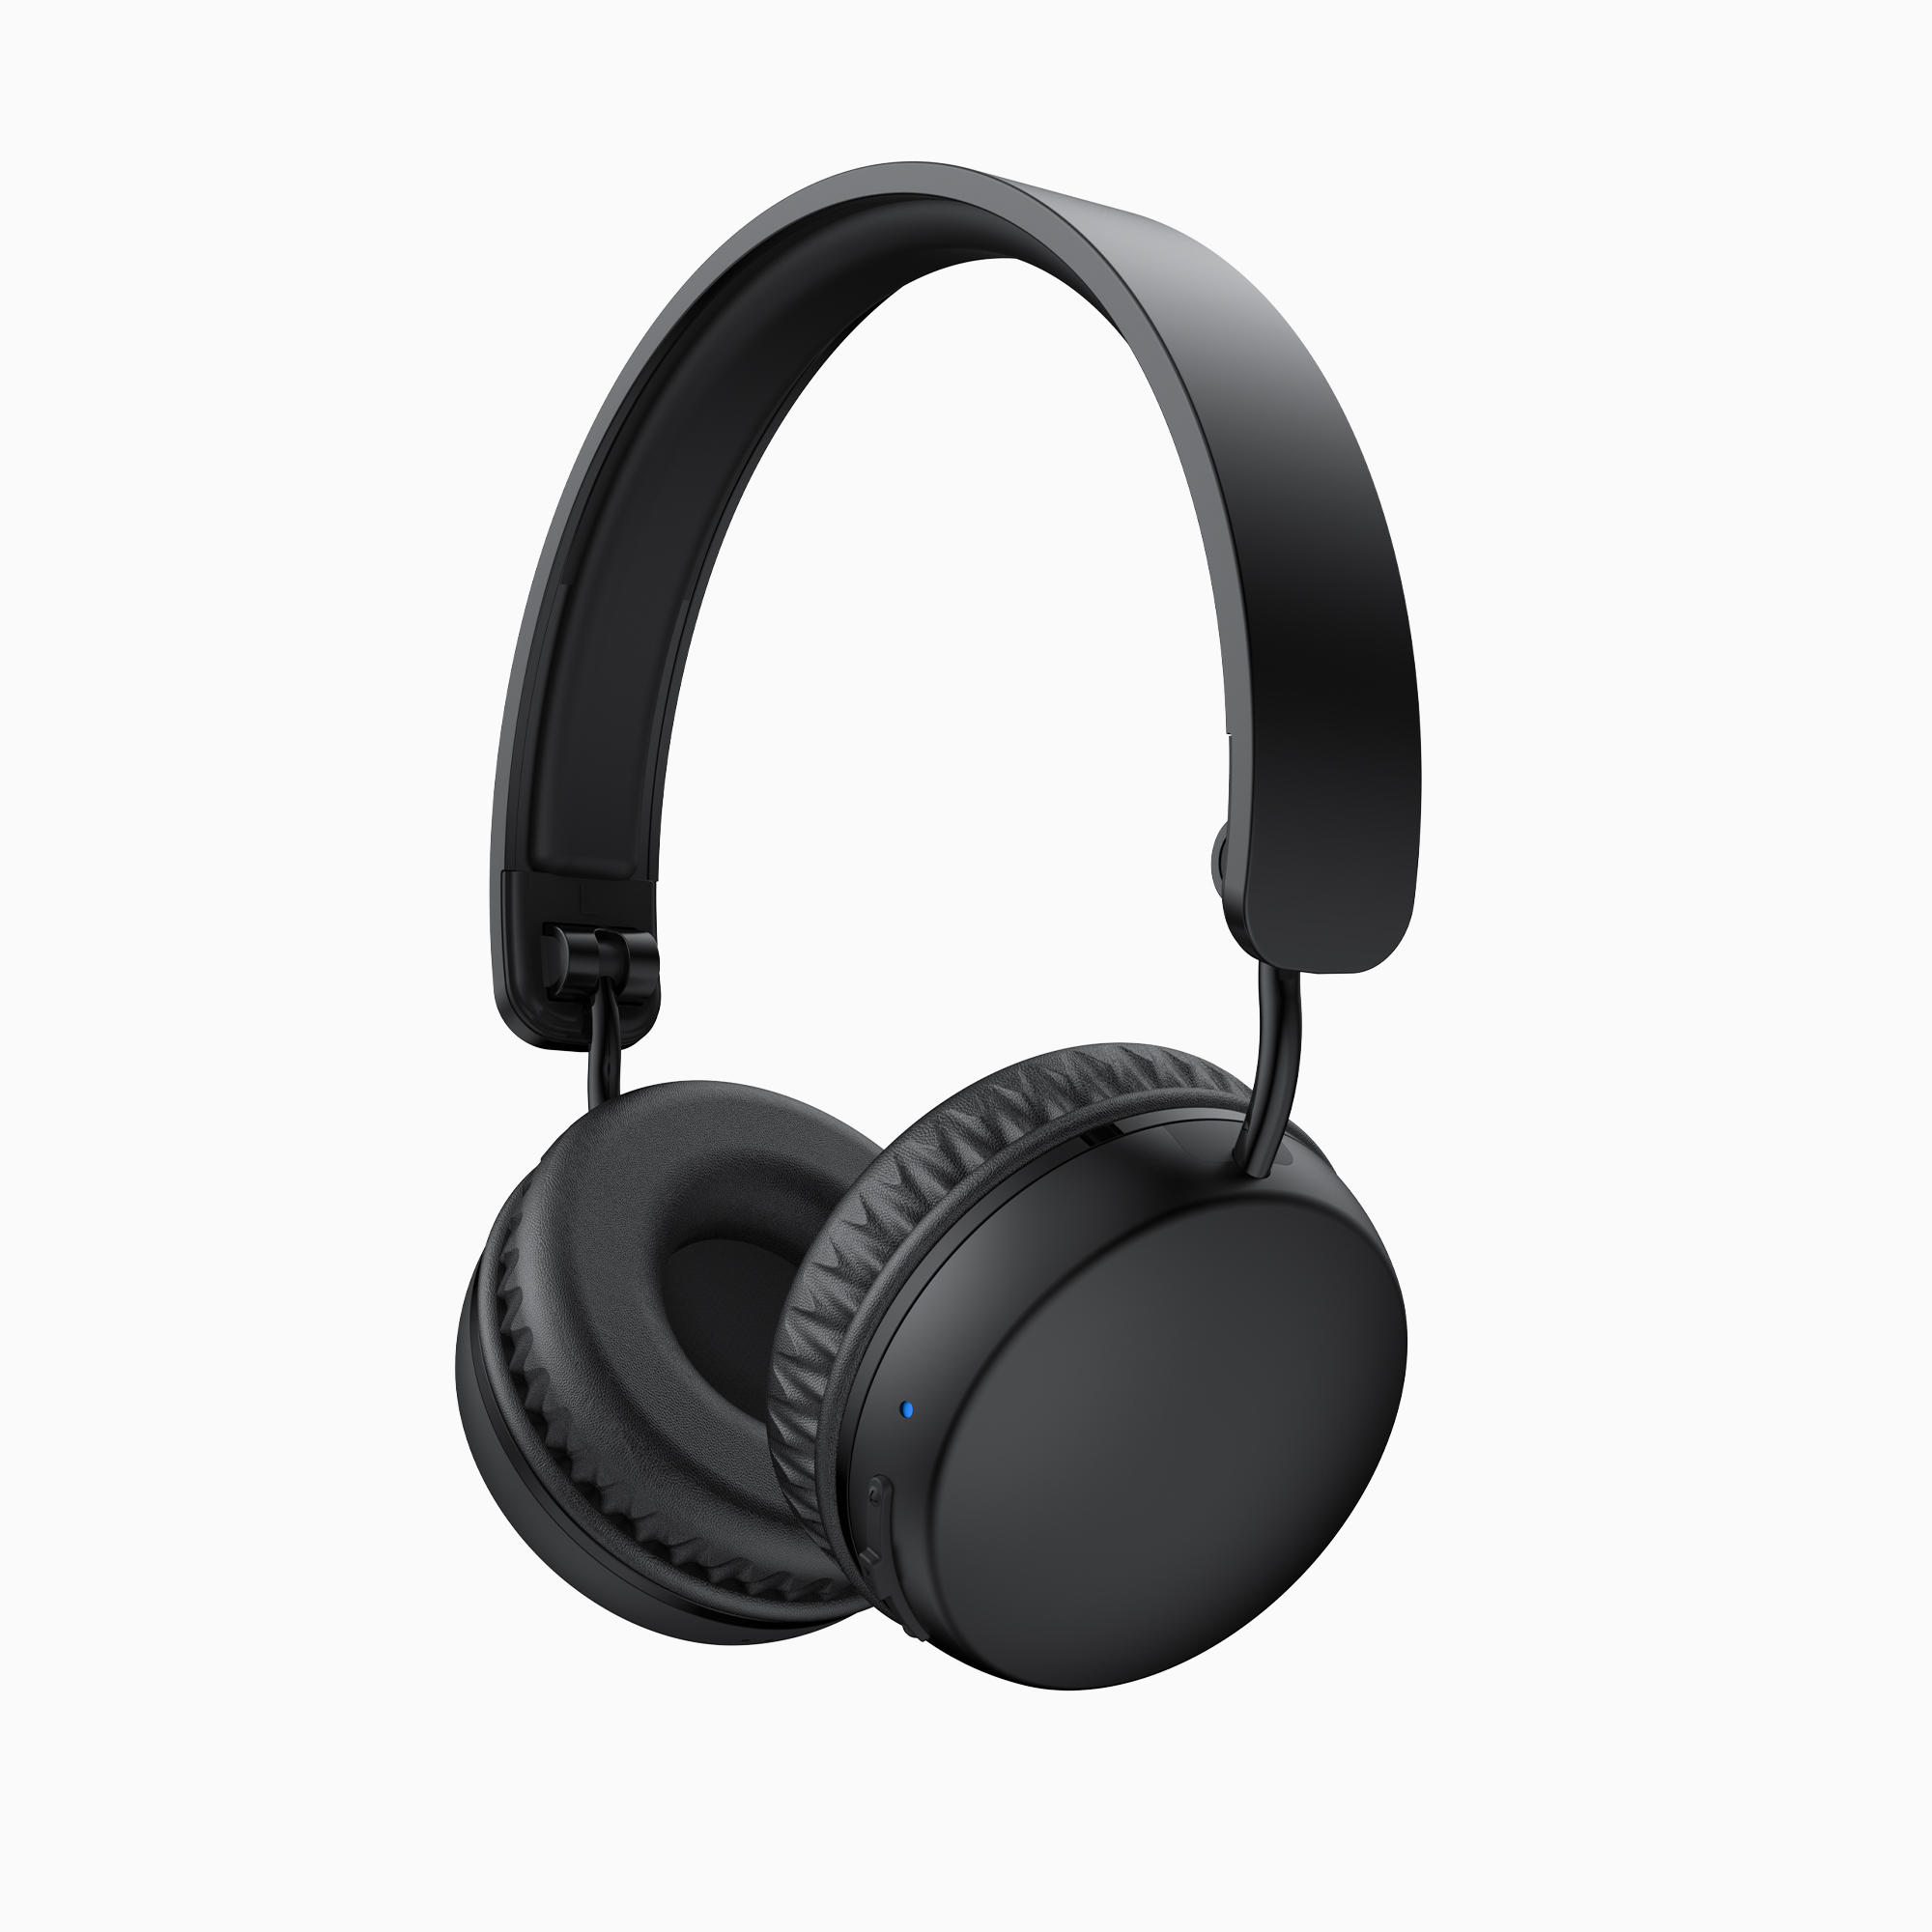 L41 compact and portable music headphone